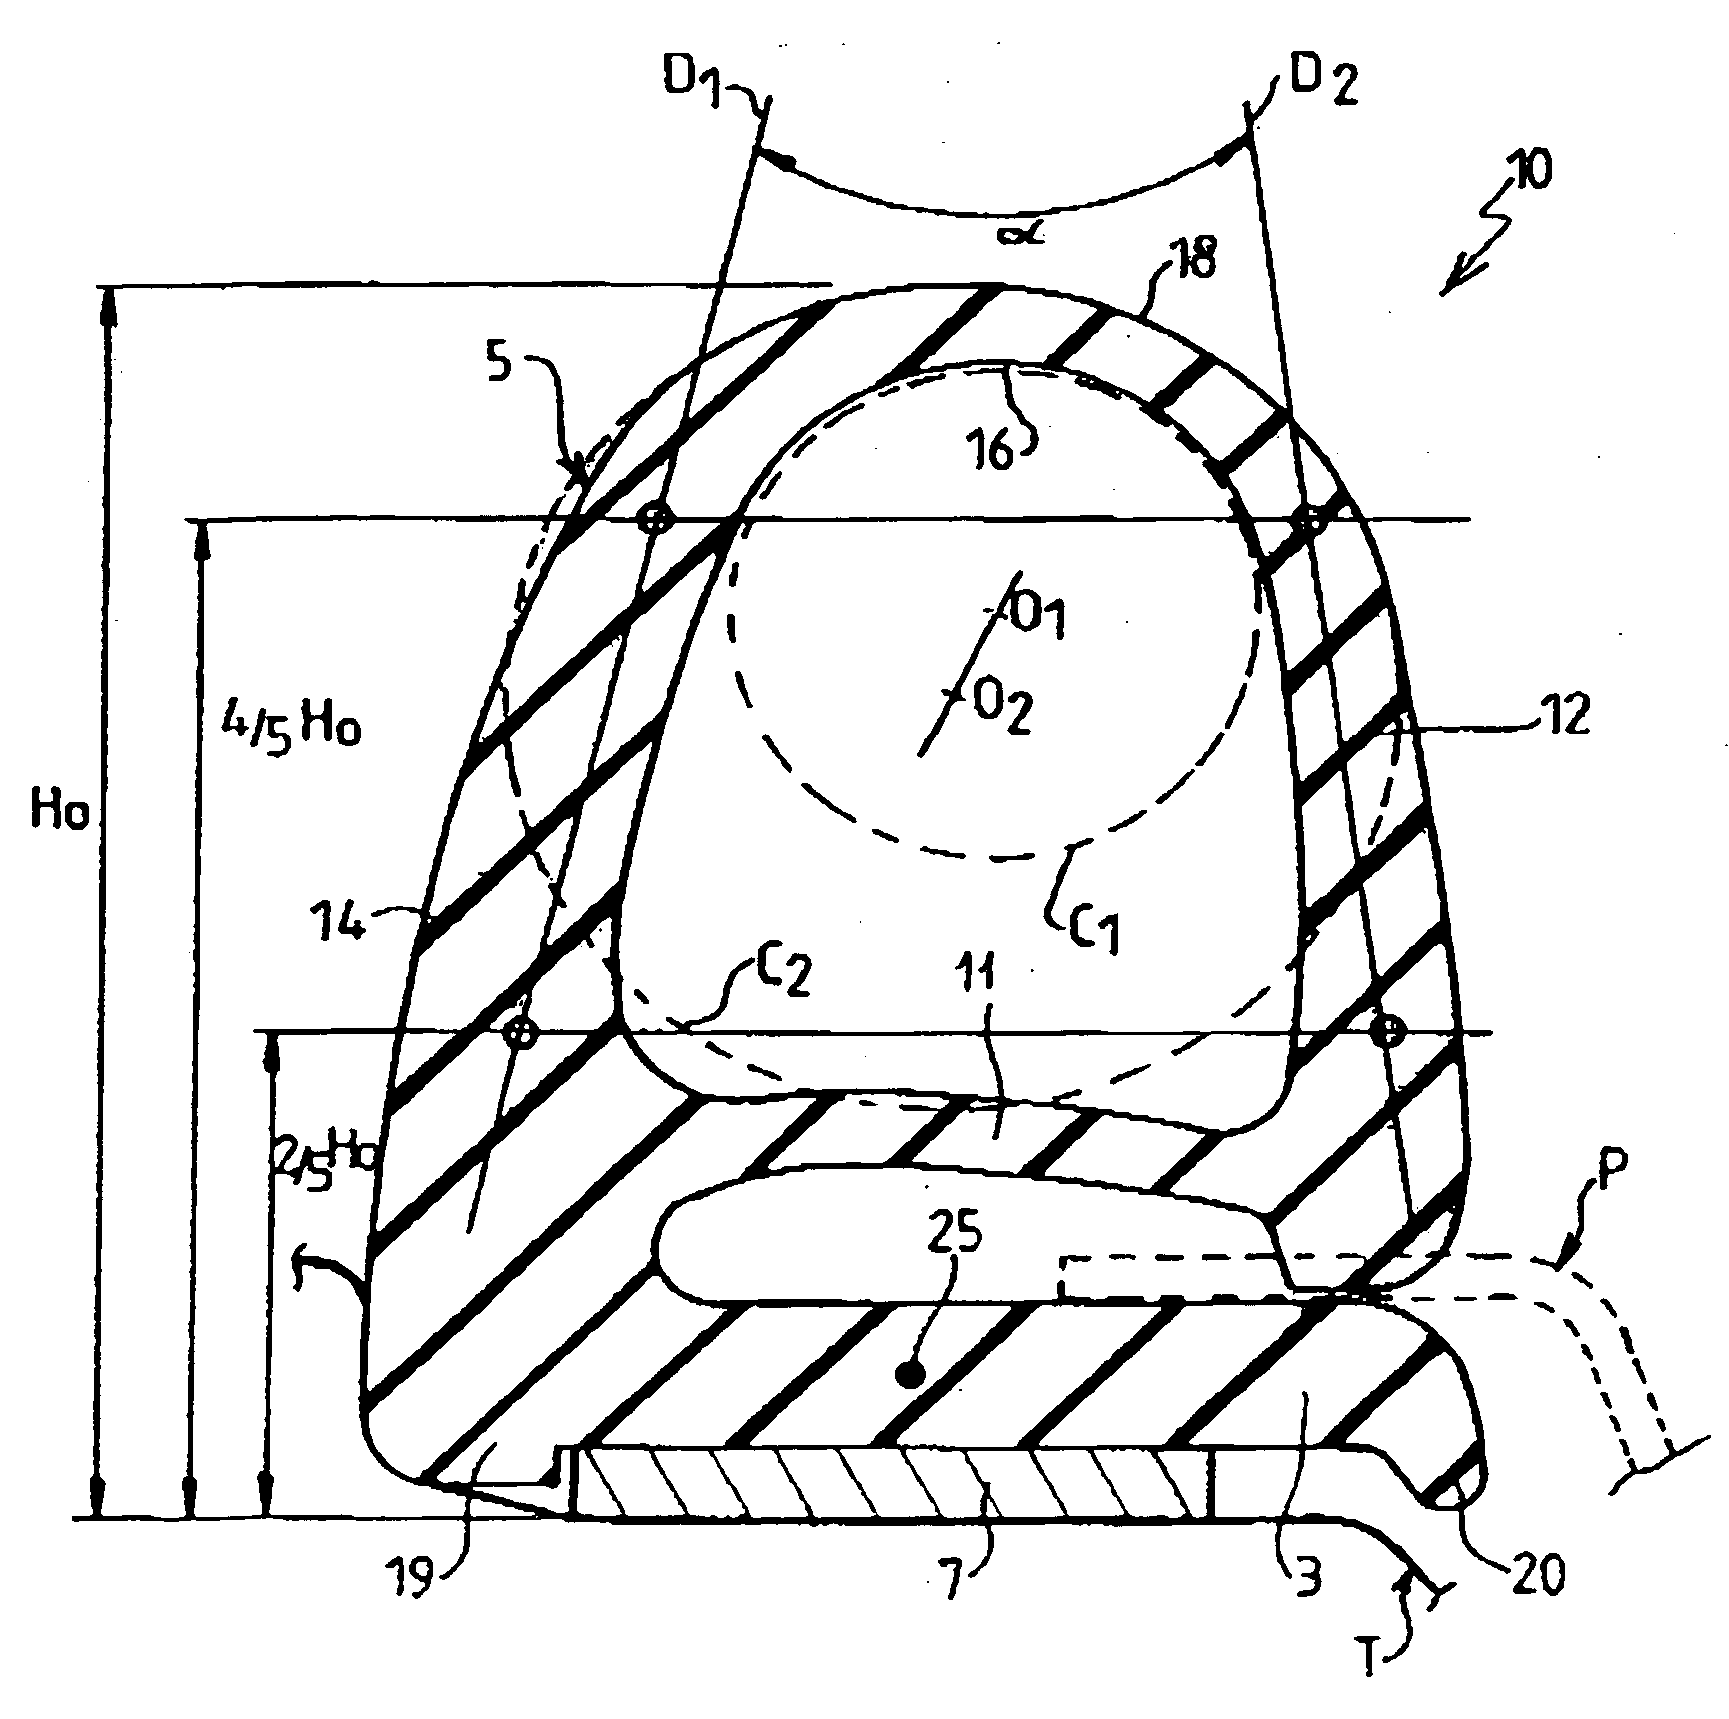 Sealing gasket for mounting on a motor vehicle door that presents at least one corner having a small radius of curvature